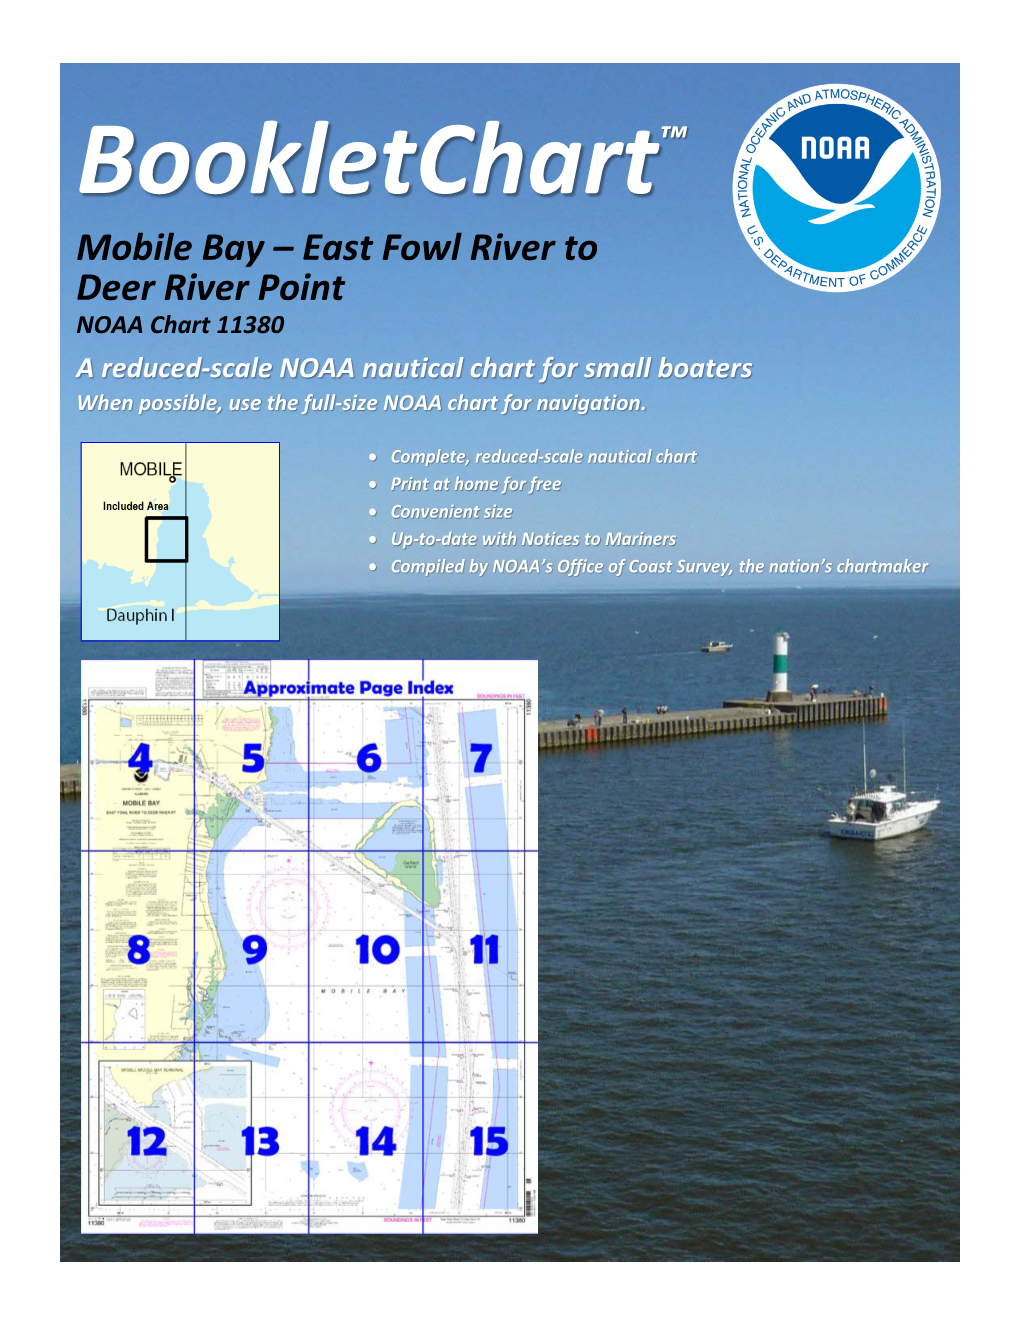 Bookletchart™ Mobile Bay – East Fowl River to Deer River Point NOAA Chart 11380